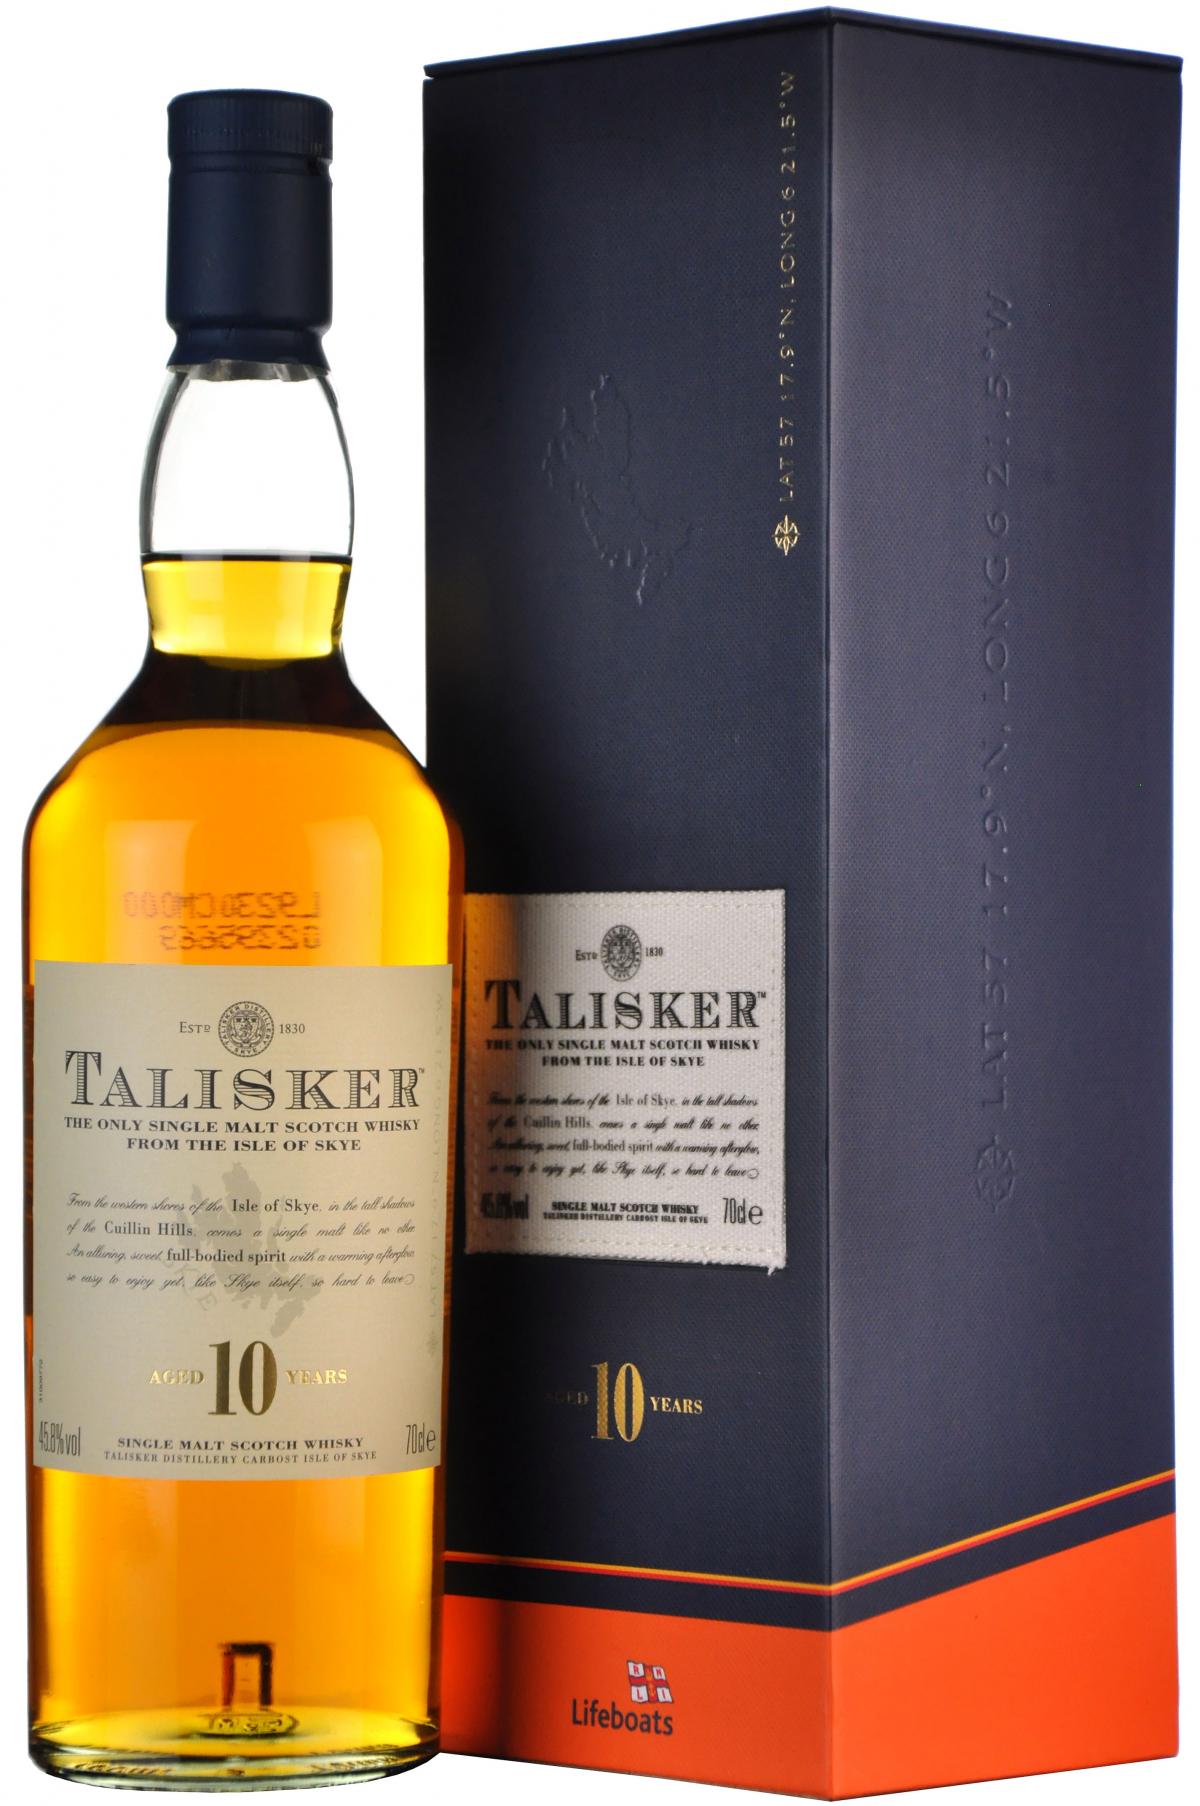 Talisker 10 Year Old | RNLI Lifeboats